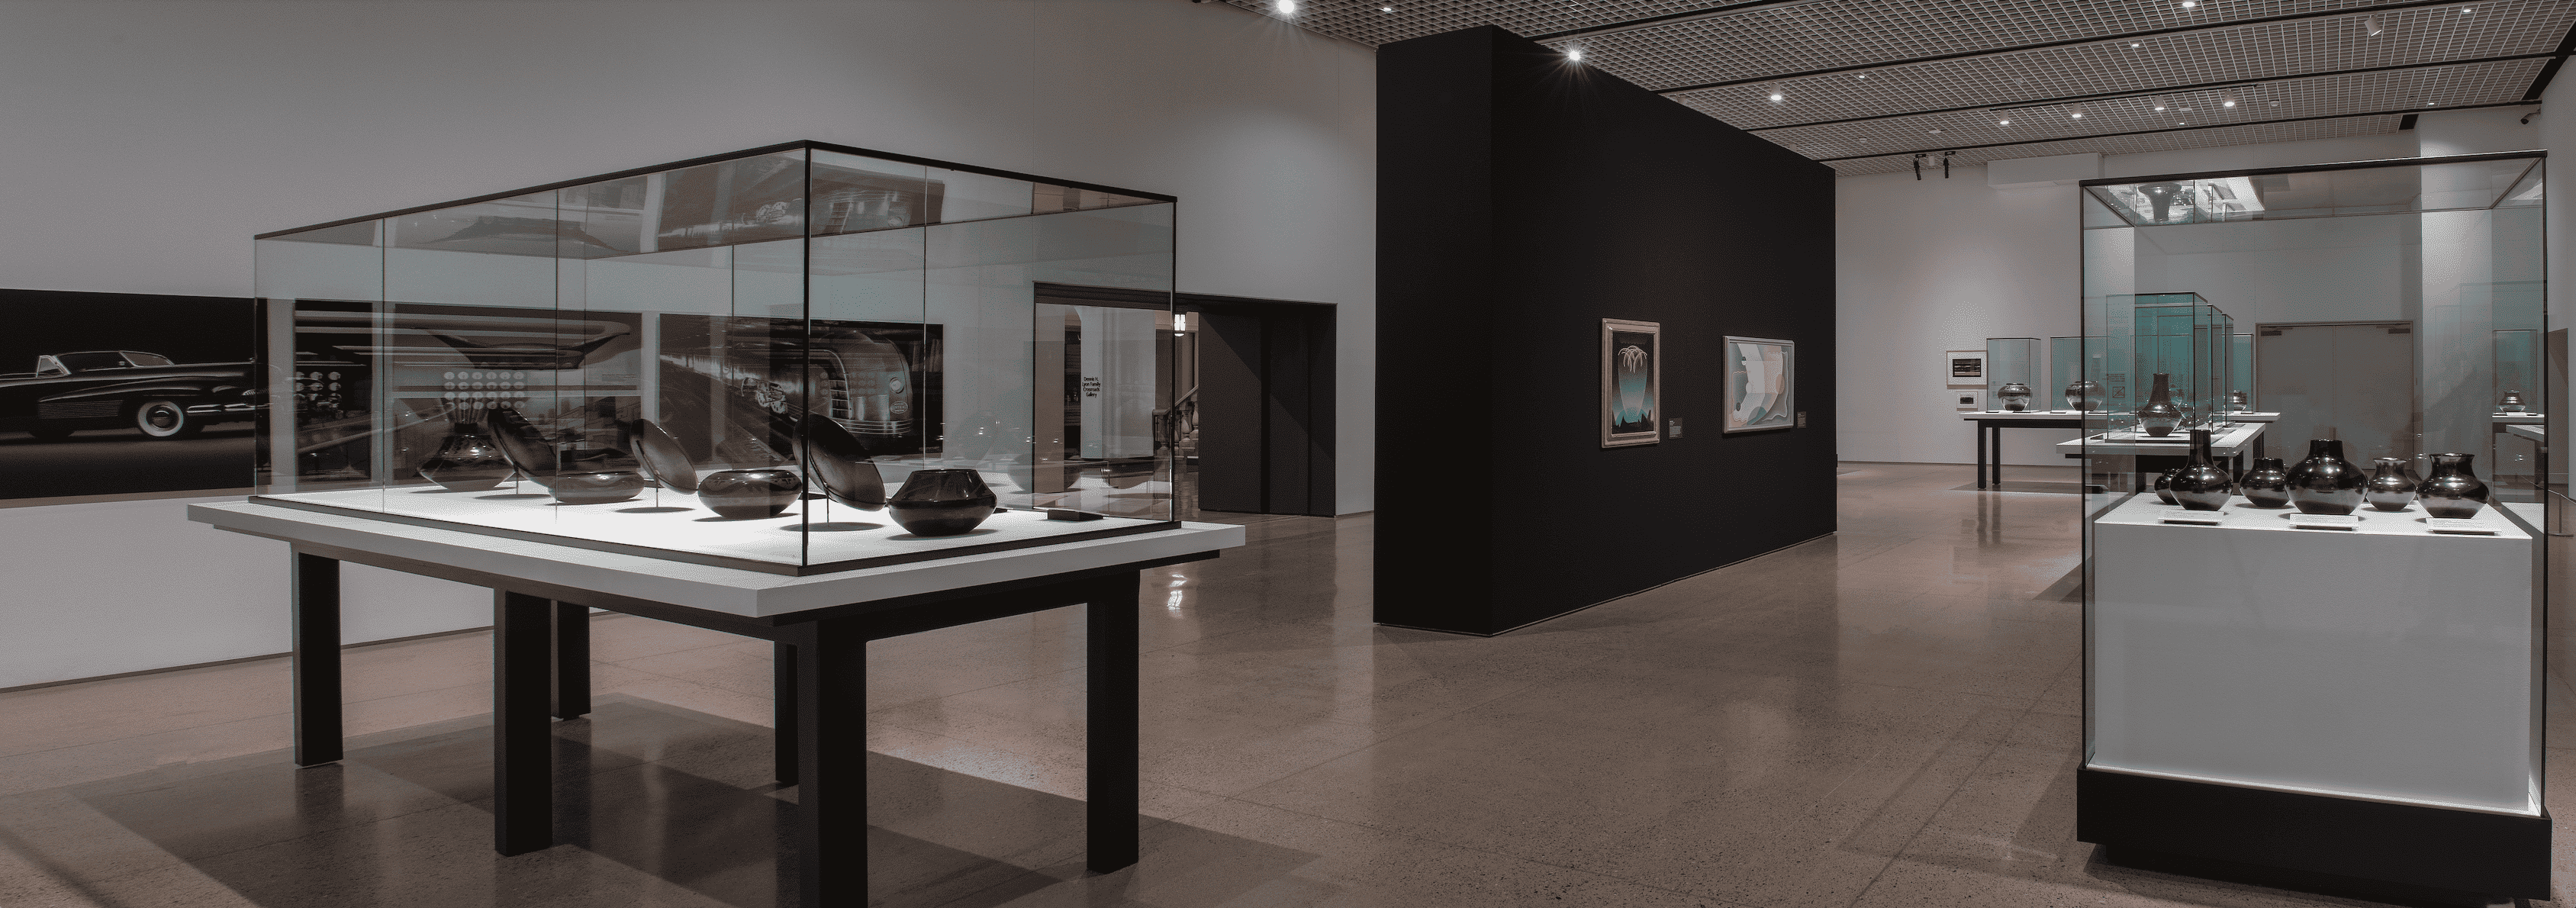 Modern art exhibit featuring a collection of glass pieces displayed in a well-lit gallery space.